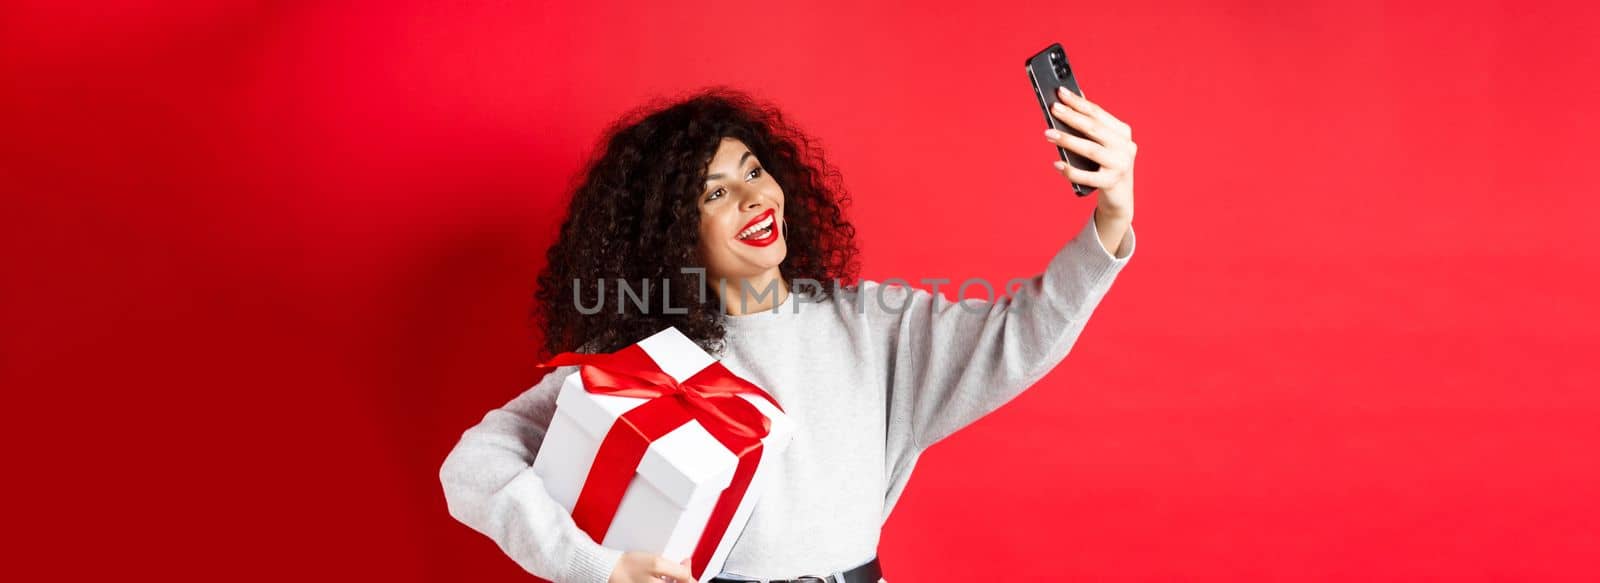 Holidays and tech concept. Happy woman taking selfie with her gift, holding present and smartphone, standing on red background.